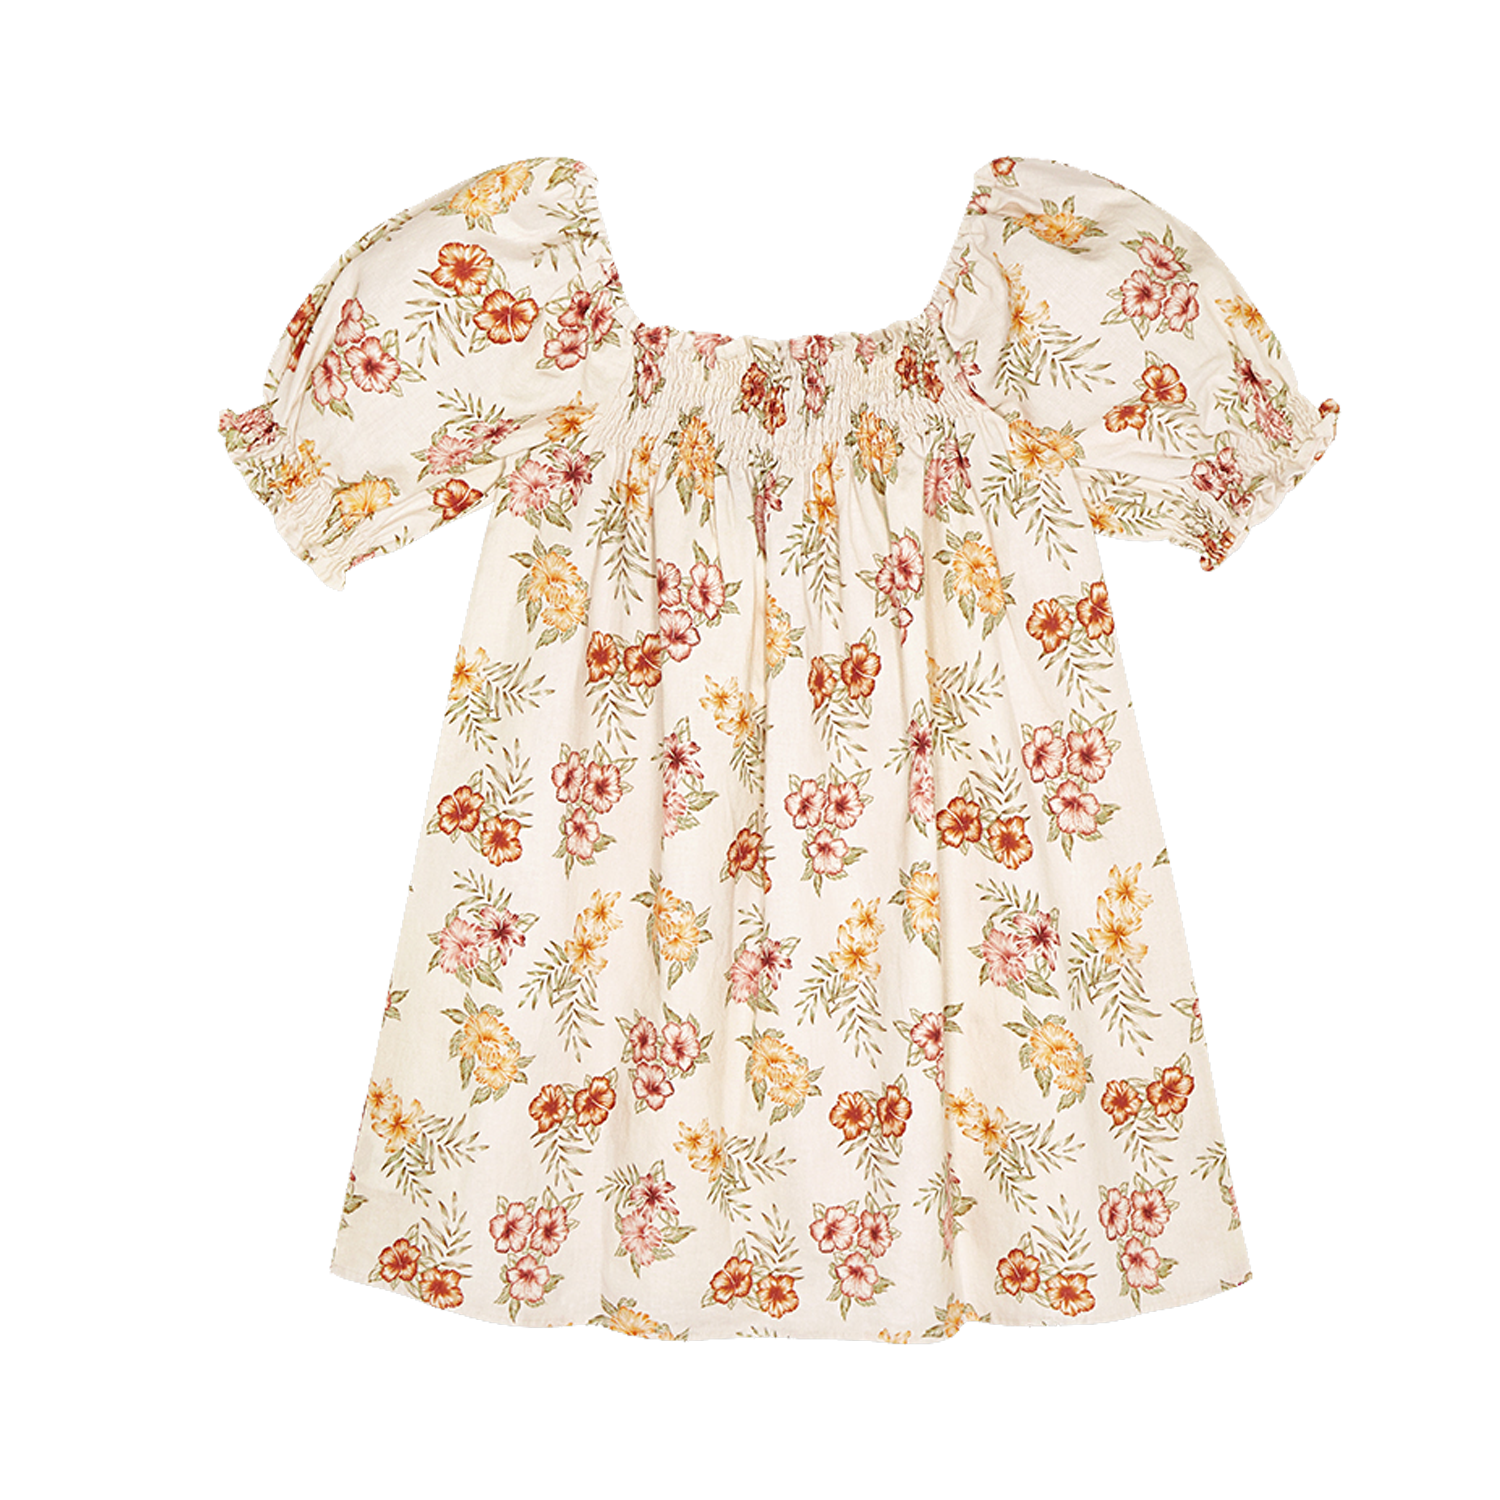 The New Society Palermo Special Dress - Floral Print